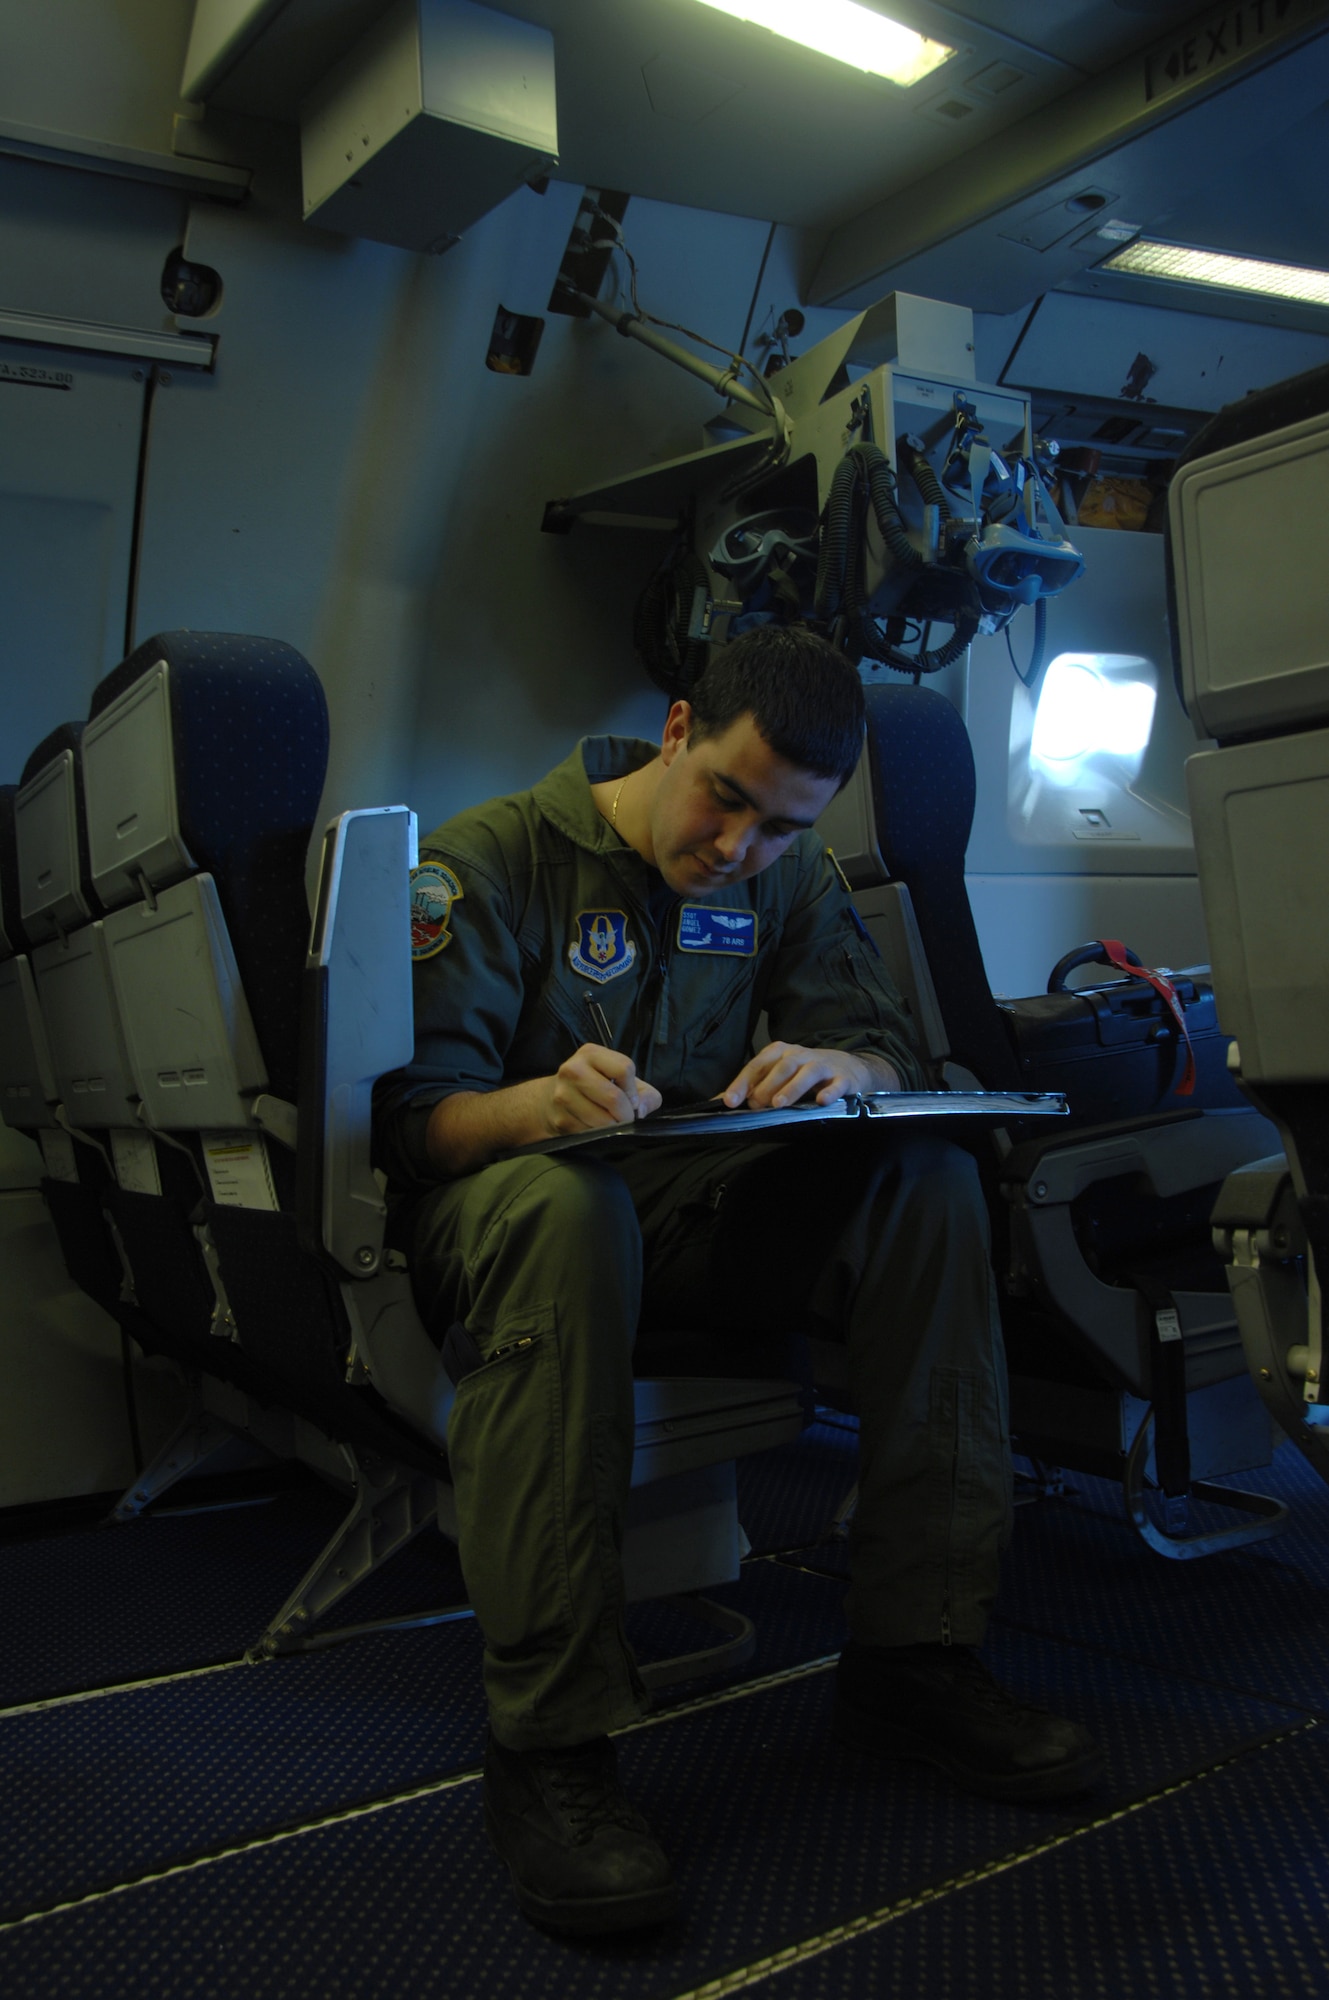 EIELSON AIR FORCE BASE, Alaska -- Staff Sgt Angel Gomez, KC-10 Boom Operator, 78th Air Refueling Squadron, McGuire Air Force Base, New Jersey performs his preflight checklist before a refueling mission here on 18 April in support of Red Flag-Alaska 07-1. Red Flag-Alaska is a Pacific Air Forces-directed field training exercise for U.S. forces flown under simulated air combat conditions. (U.S. Air Force photo by Staff Sgt. Joshua Strang)